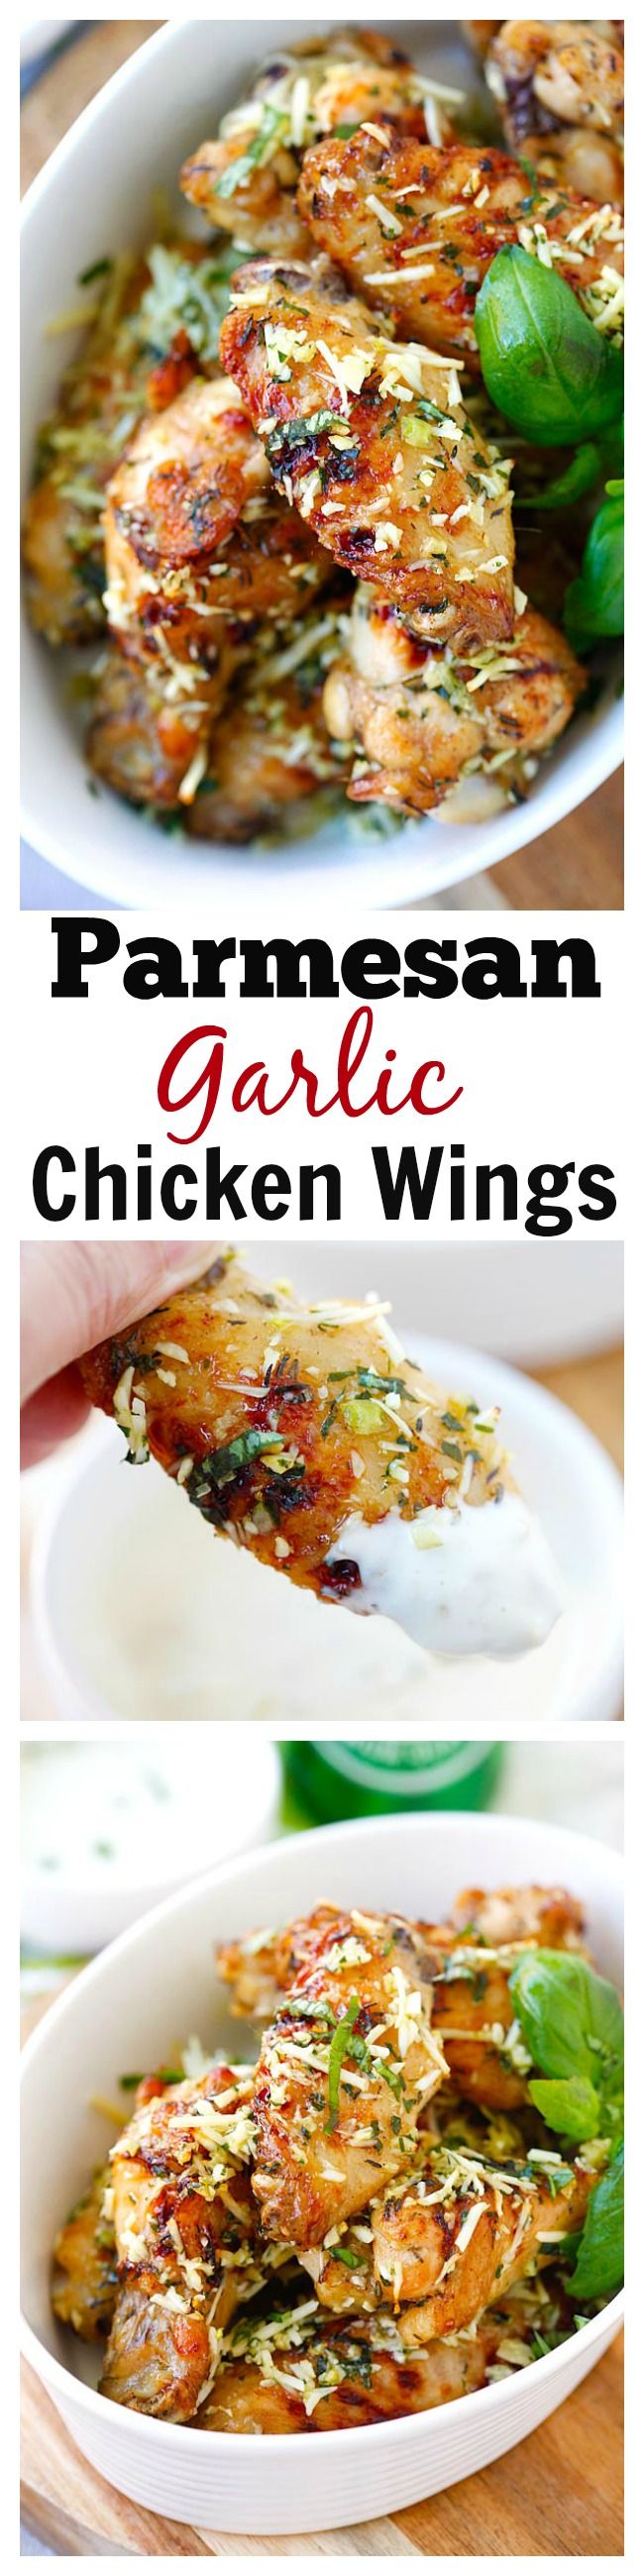 Best and easiest Baked Parmesan Garlic Chicken Wings made with Parmesan, garlic, basil, and spices, with blue cheese mustard dressing. | rasamalaysia.com